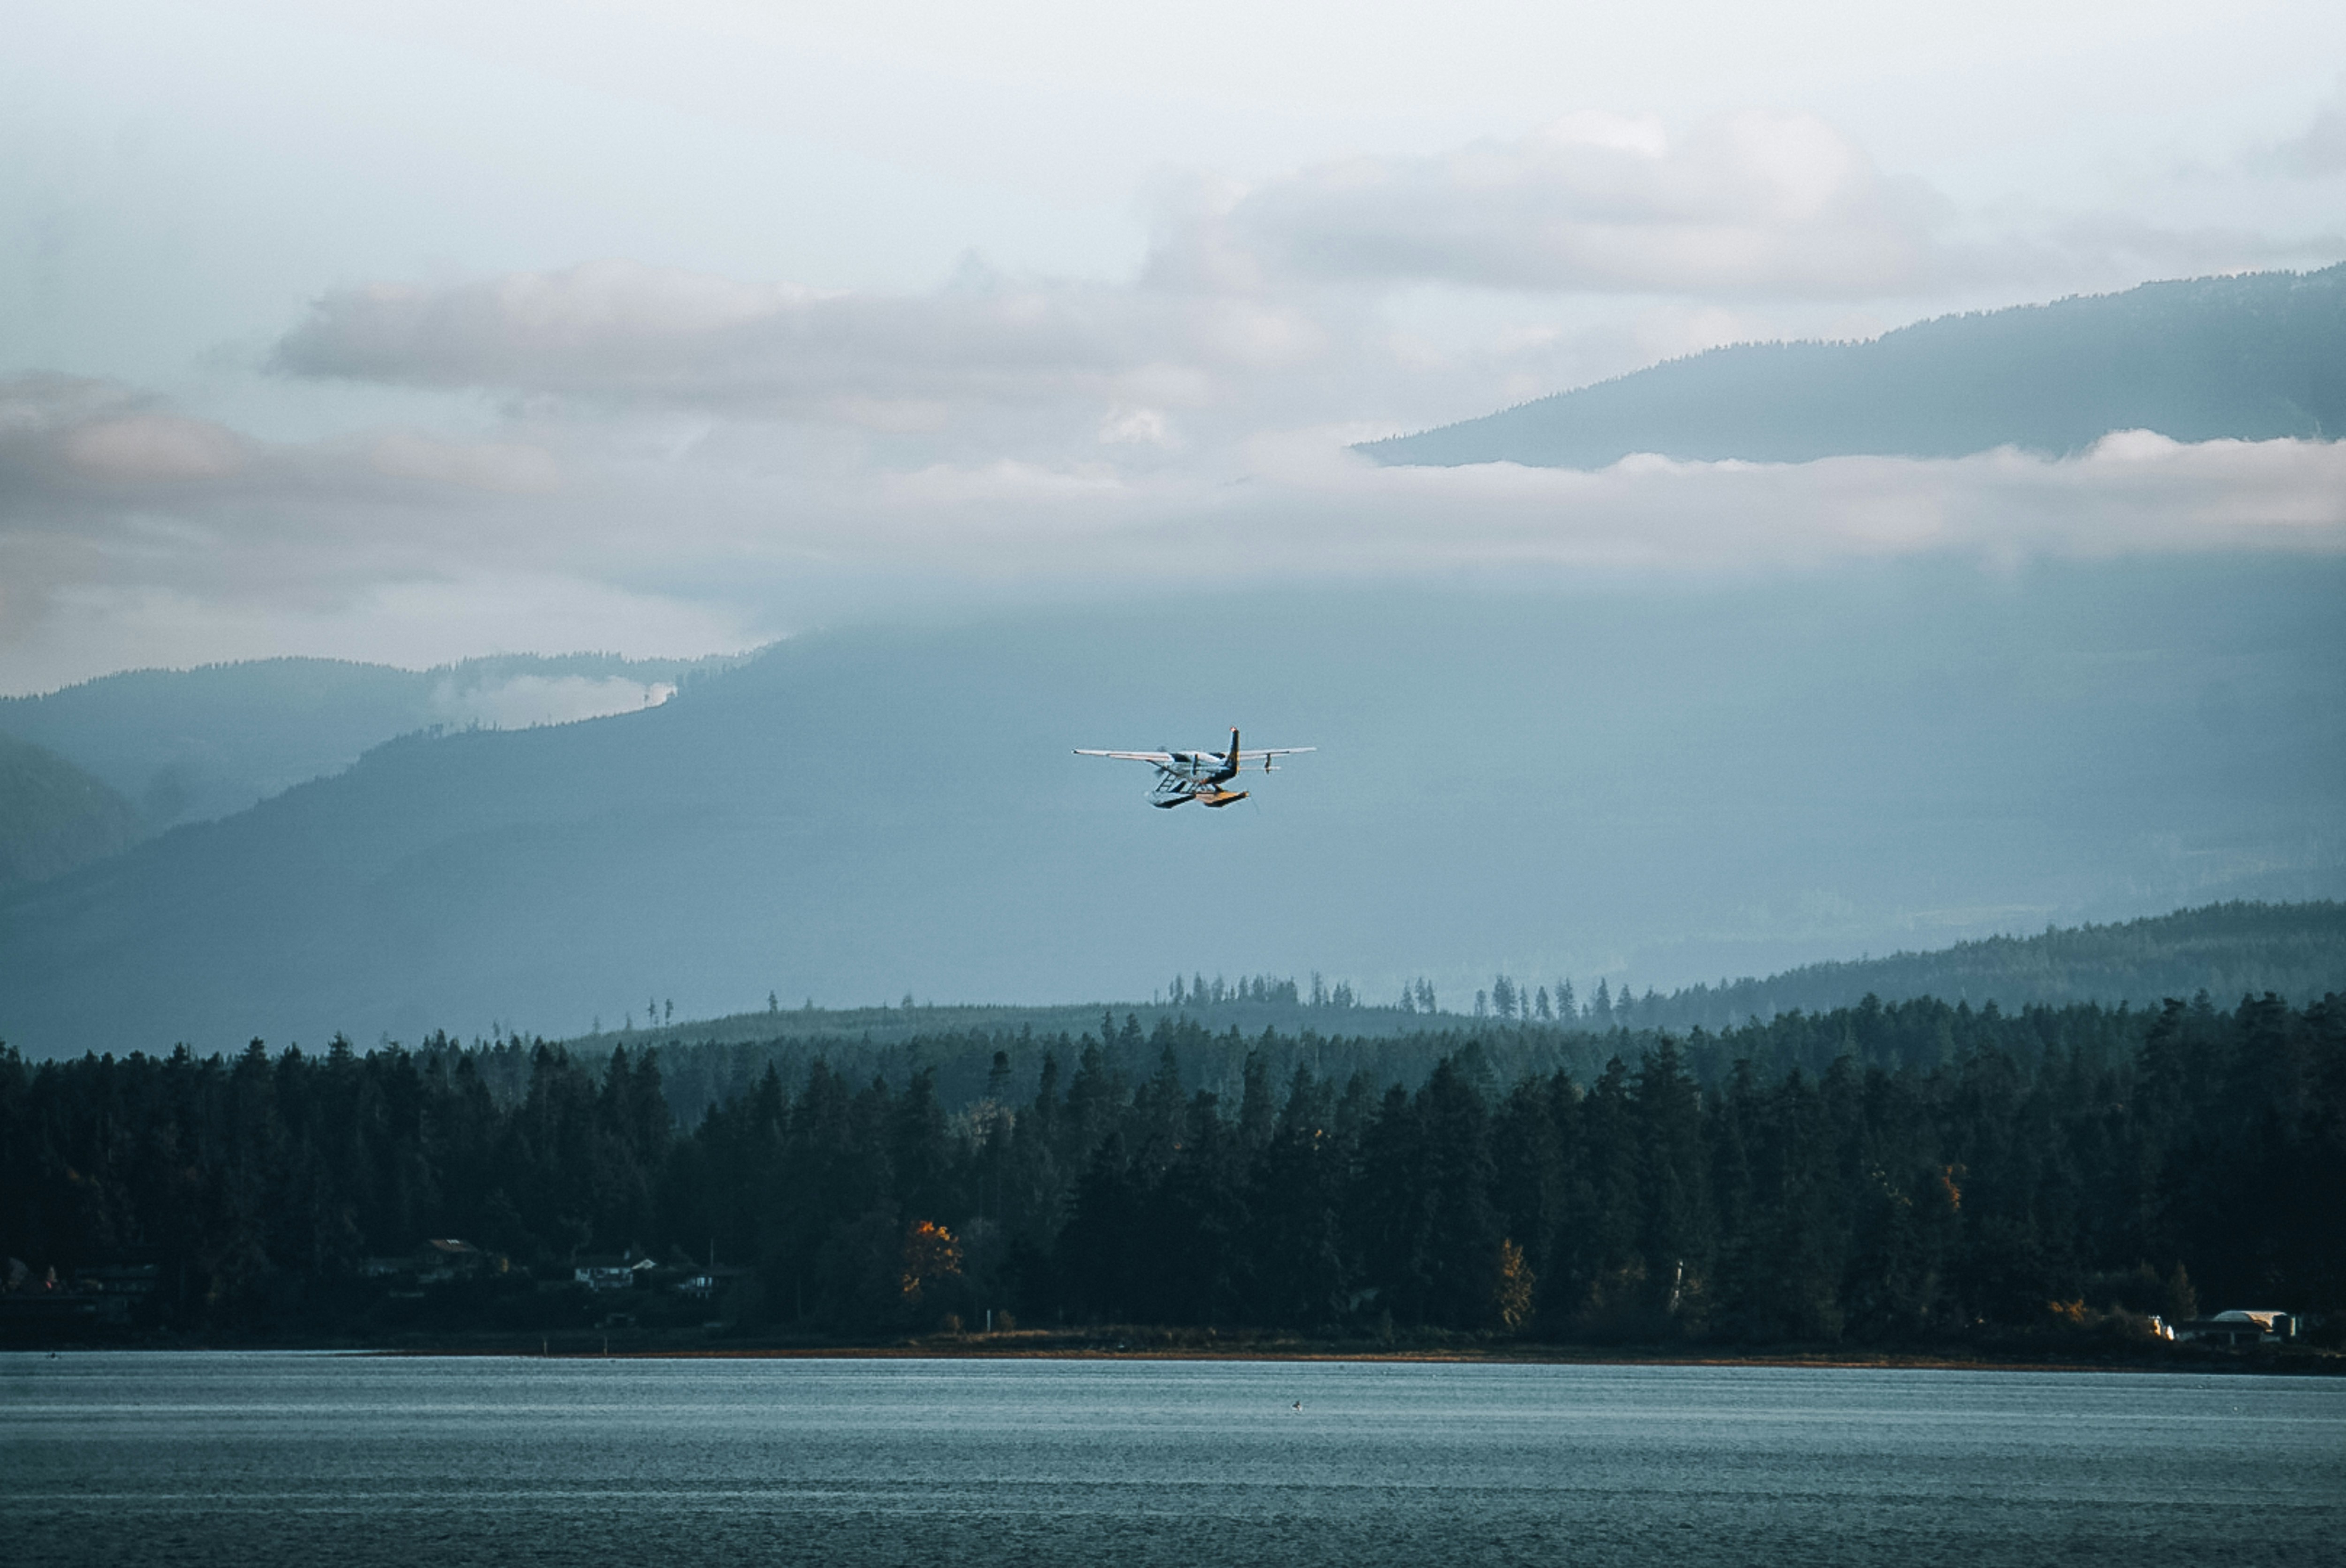 A Harbour Air flight takes off from Comox Bay on Vancouver Island.